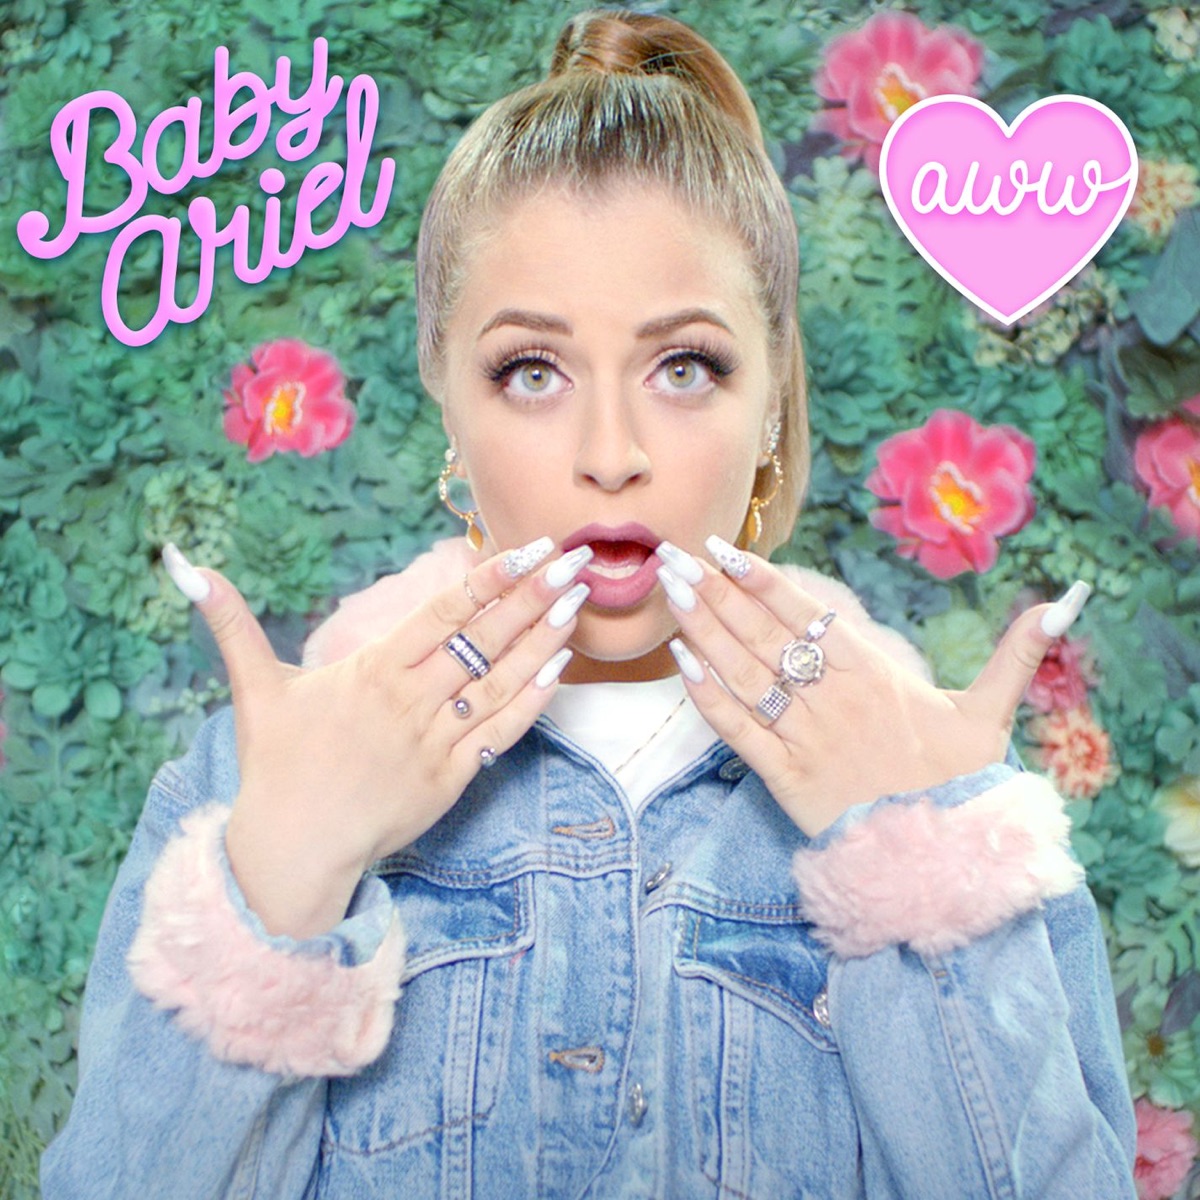 Gucci On My Body - Single by Baby Ariel on Apple Music